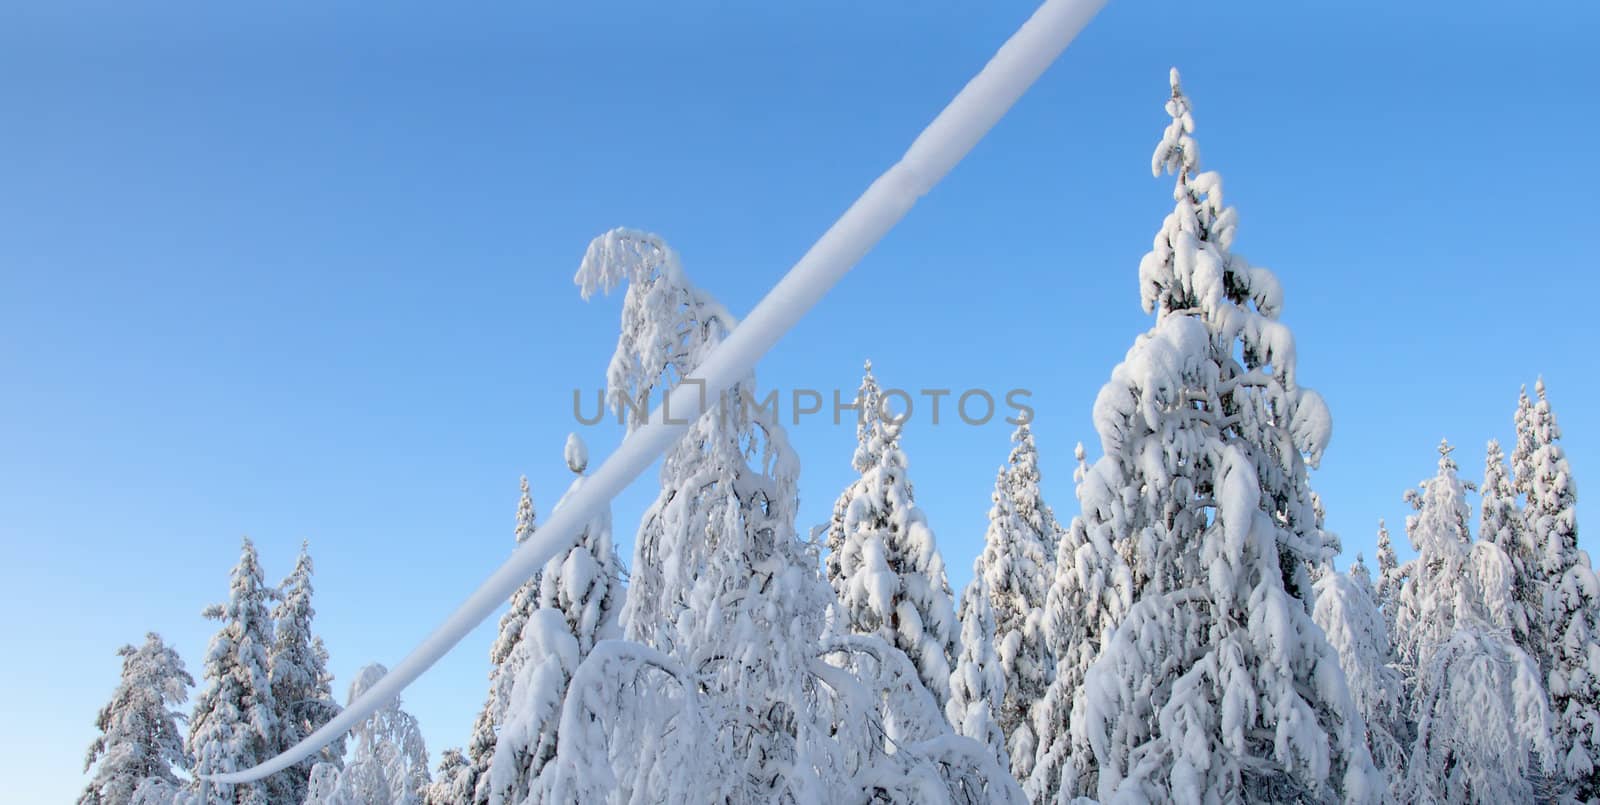 Heavy snow on trees and a phone line against a clear blue sky.